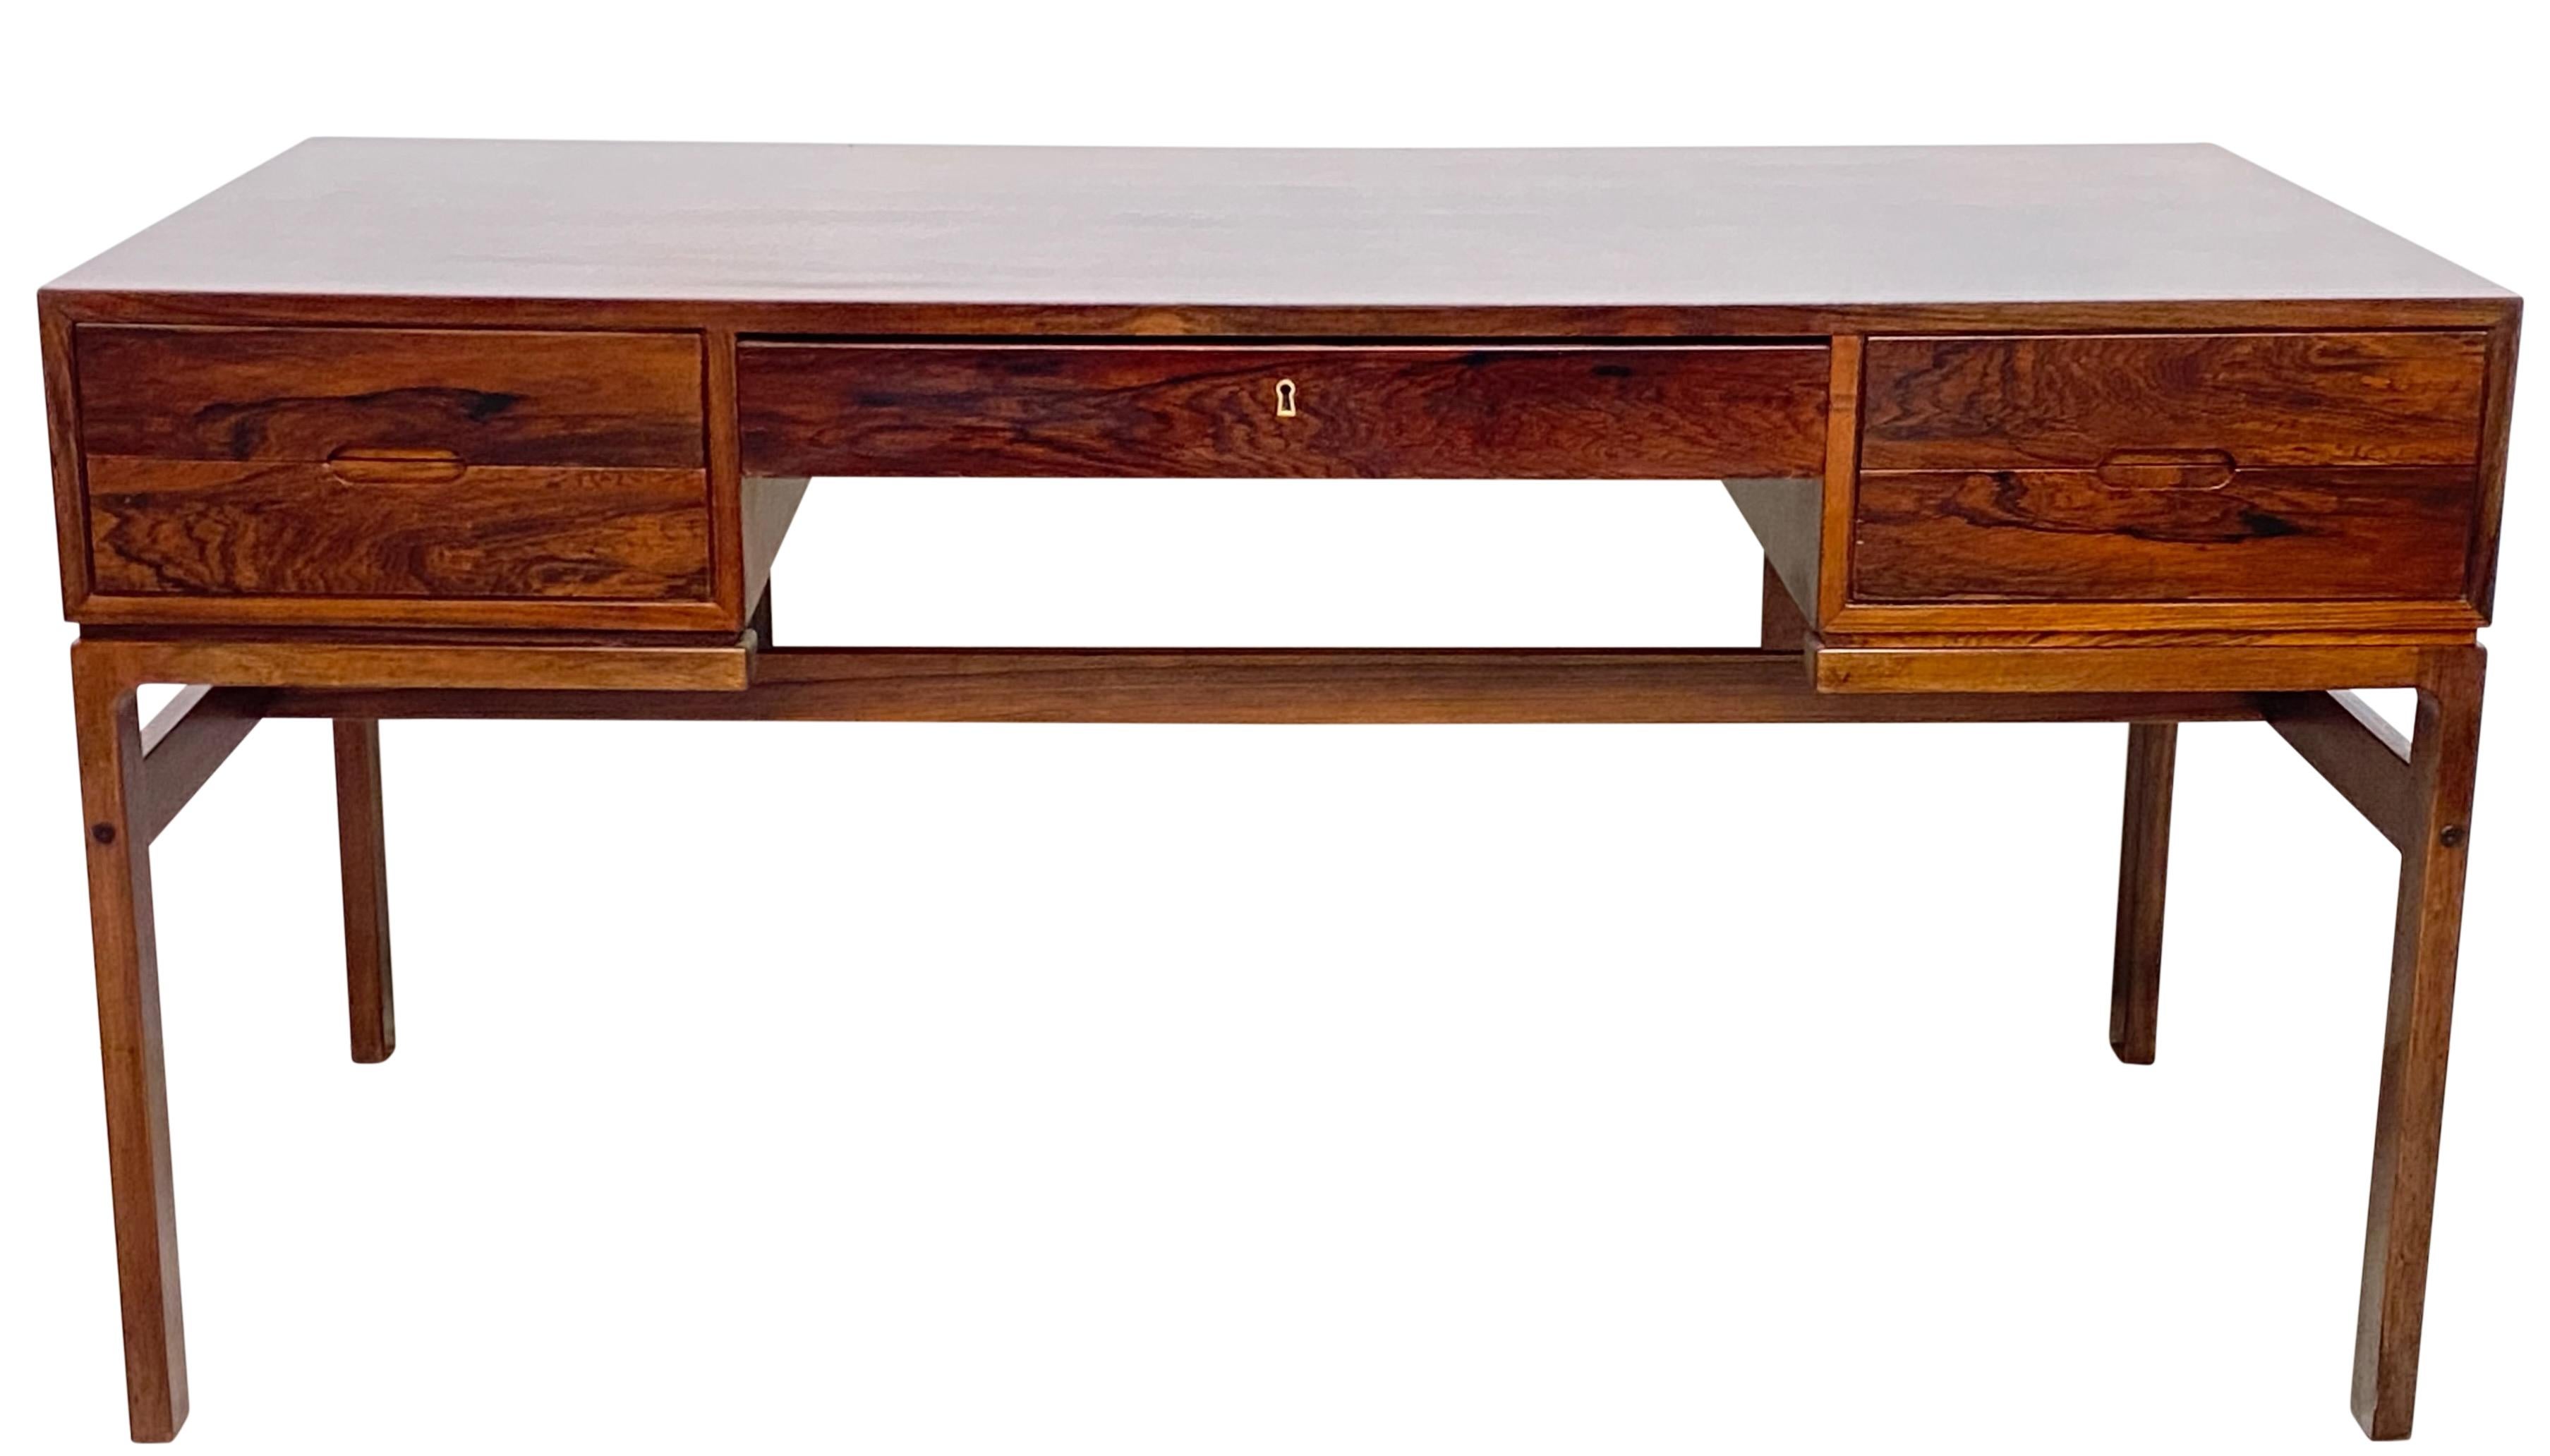 Model No. 80 rosewood desk, designed by Arne Wahl Iversen and produced by Vinde Møbelfabrik in Denmark. It is finished on both sides, with display cubbies on the back, so it can float anywhere in the room.
Highly figural rosewood with original